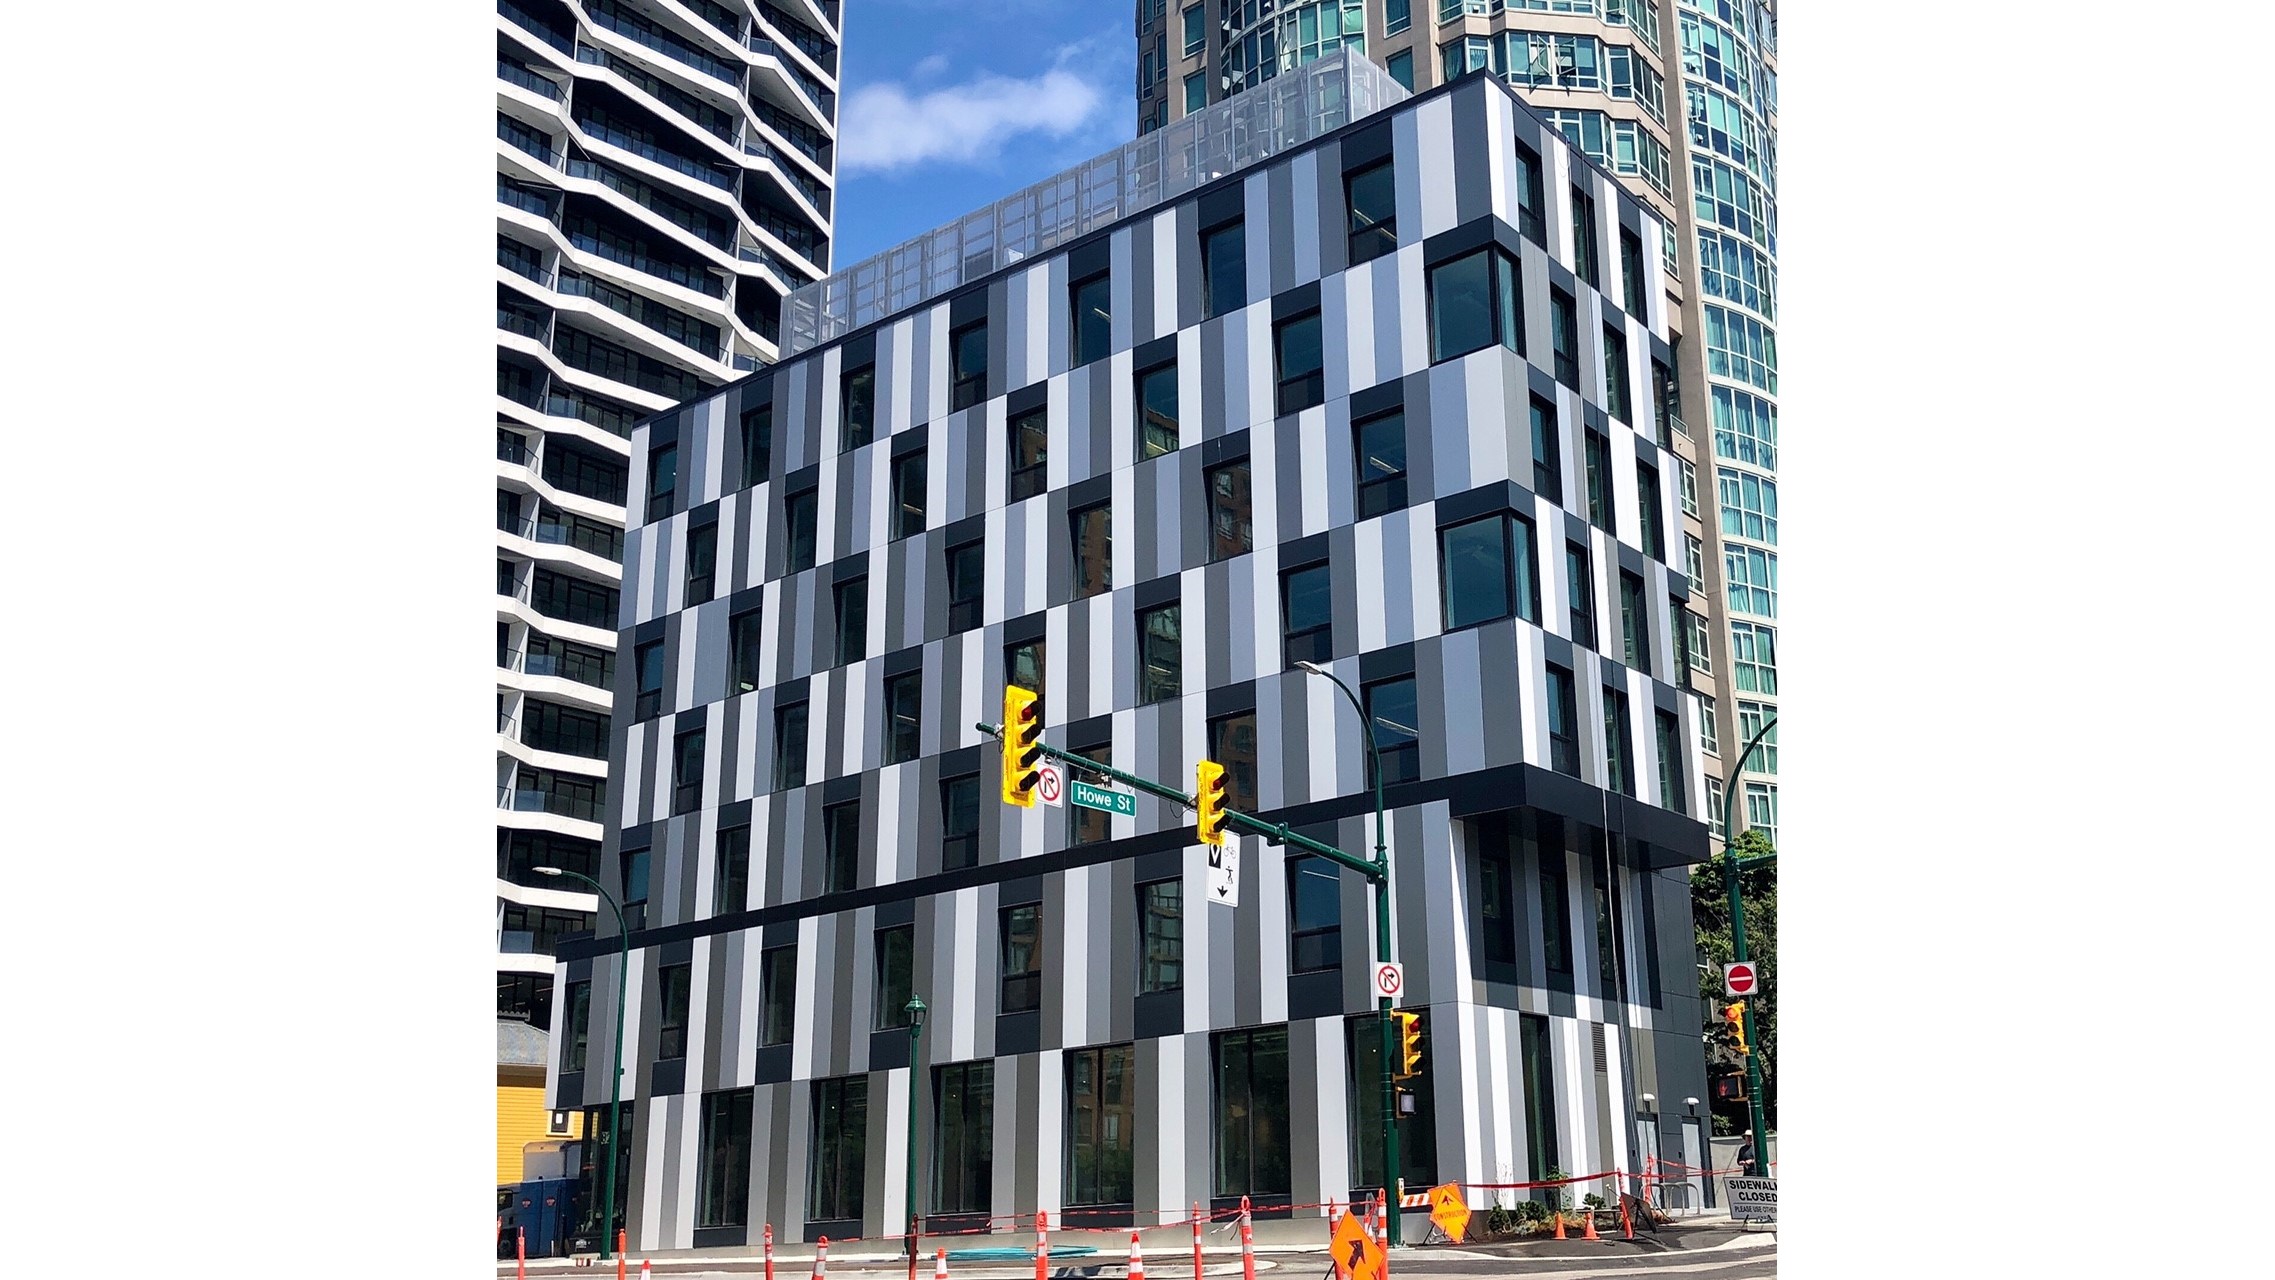 ZEBx Publishes Case Study of 825 Pacific Street in Vancouver